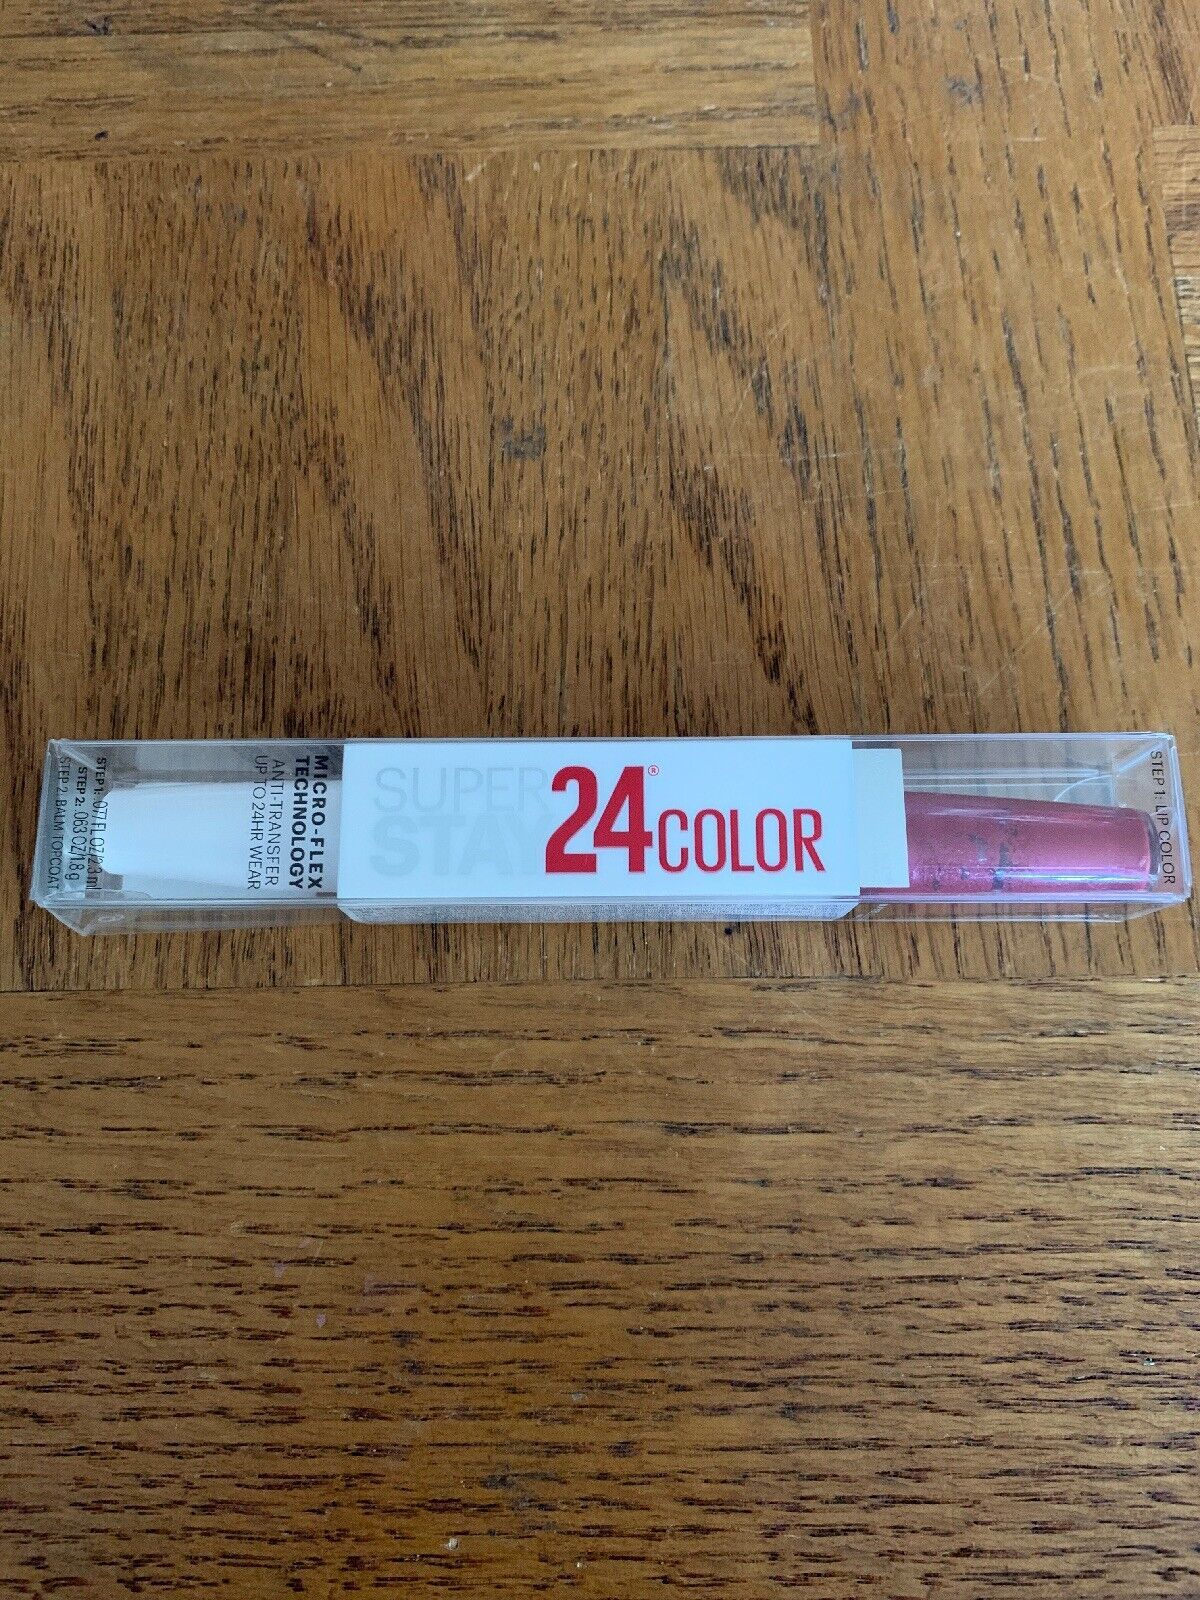 Primary image for Maybelline Super Stay 24 Color Reliable Raspberry #010-Brand New-SHIPS N 24 HOUR